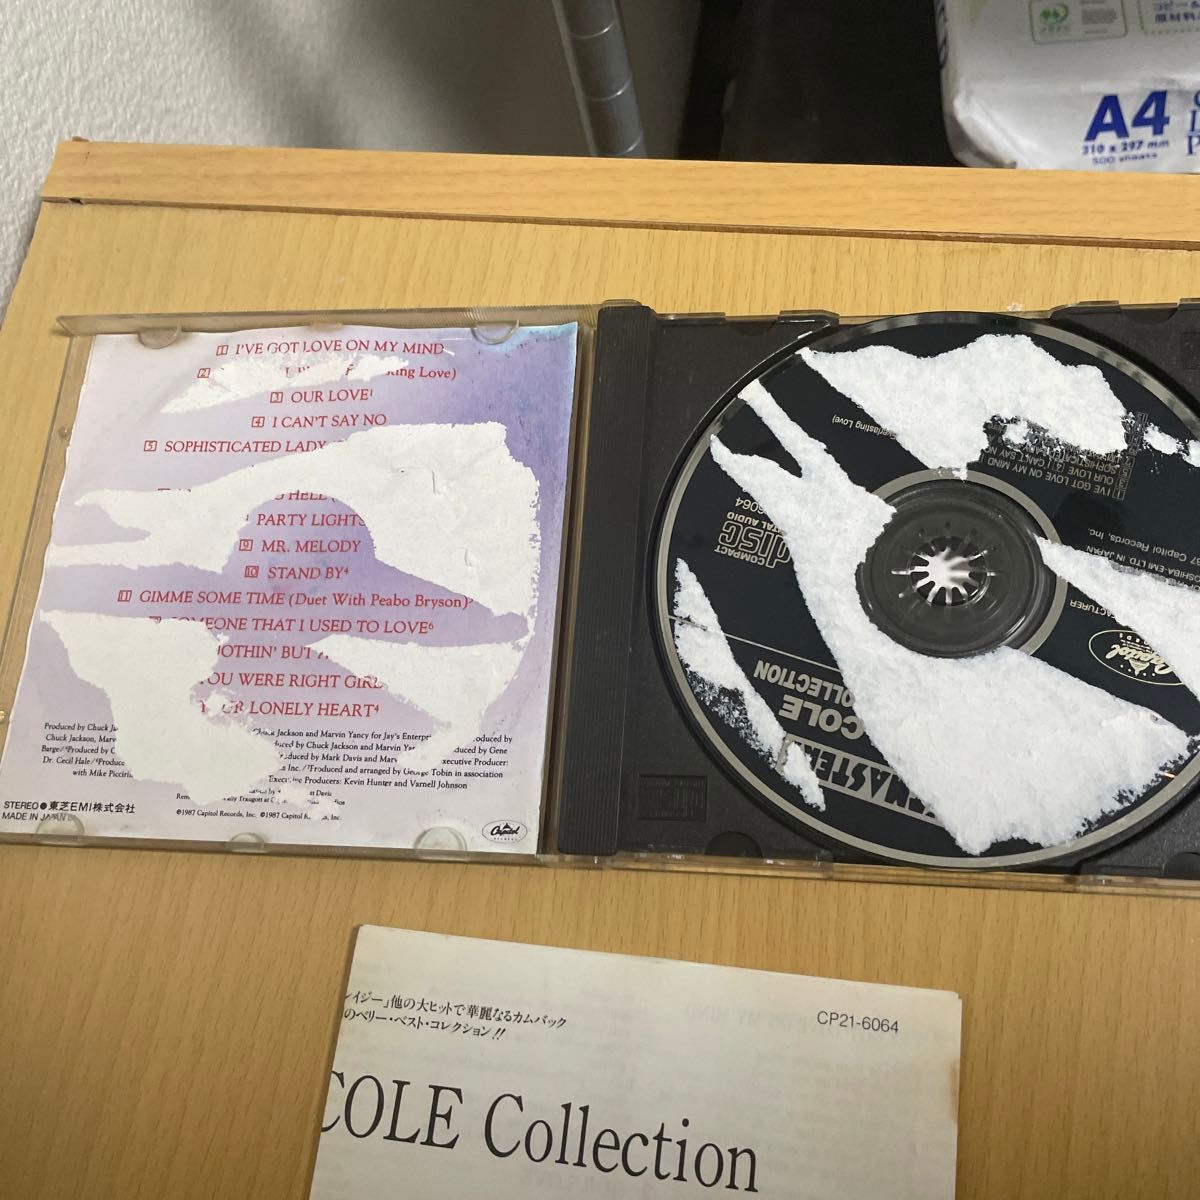 NATALIE COLE COLLECTION 国内盤　ナタリー・コール　送料込み